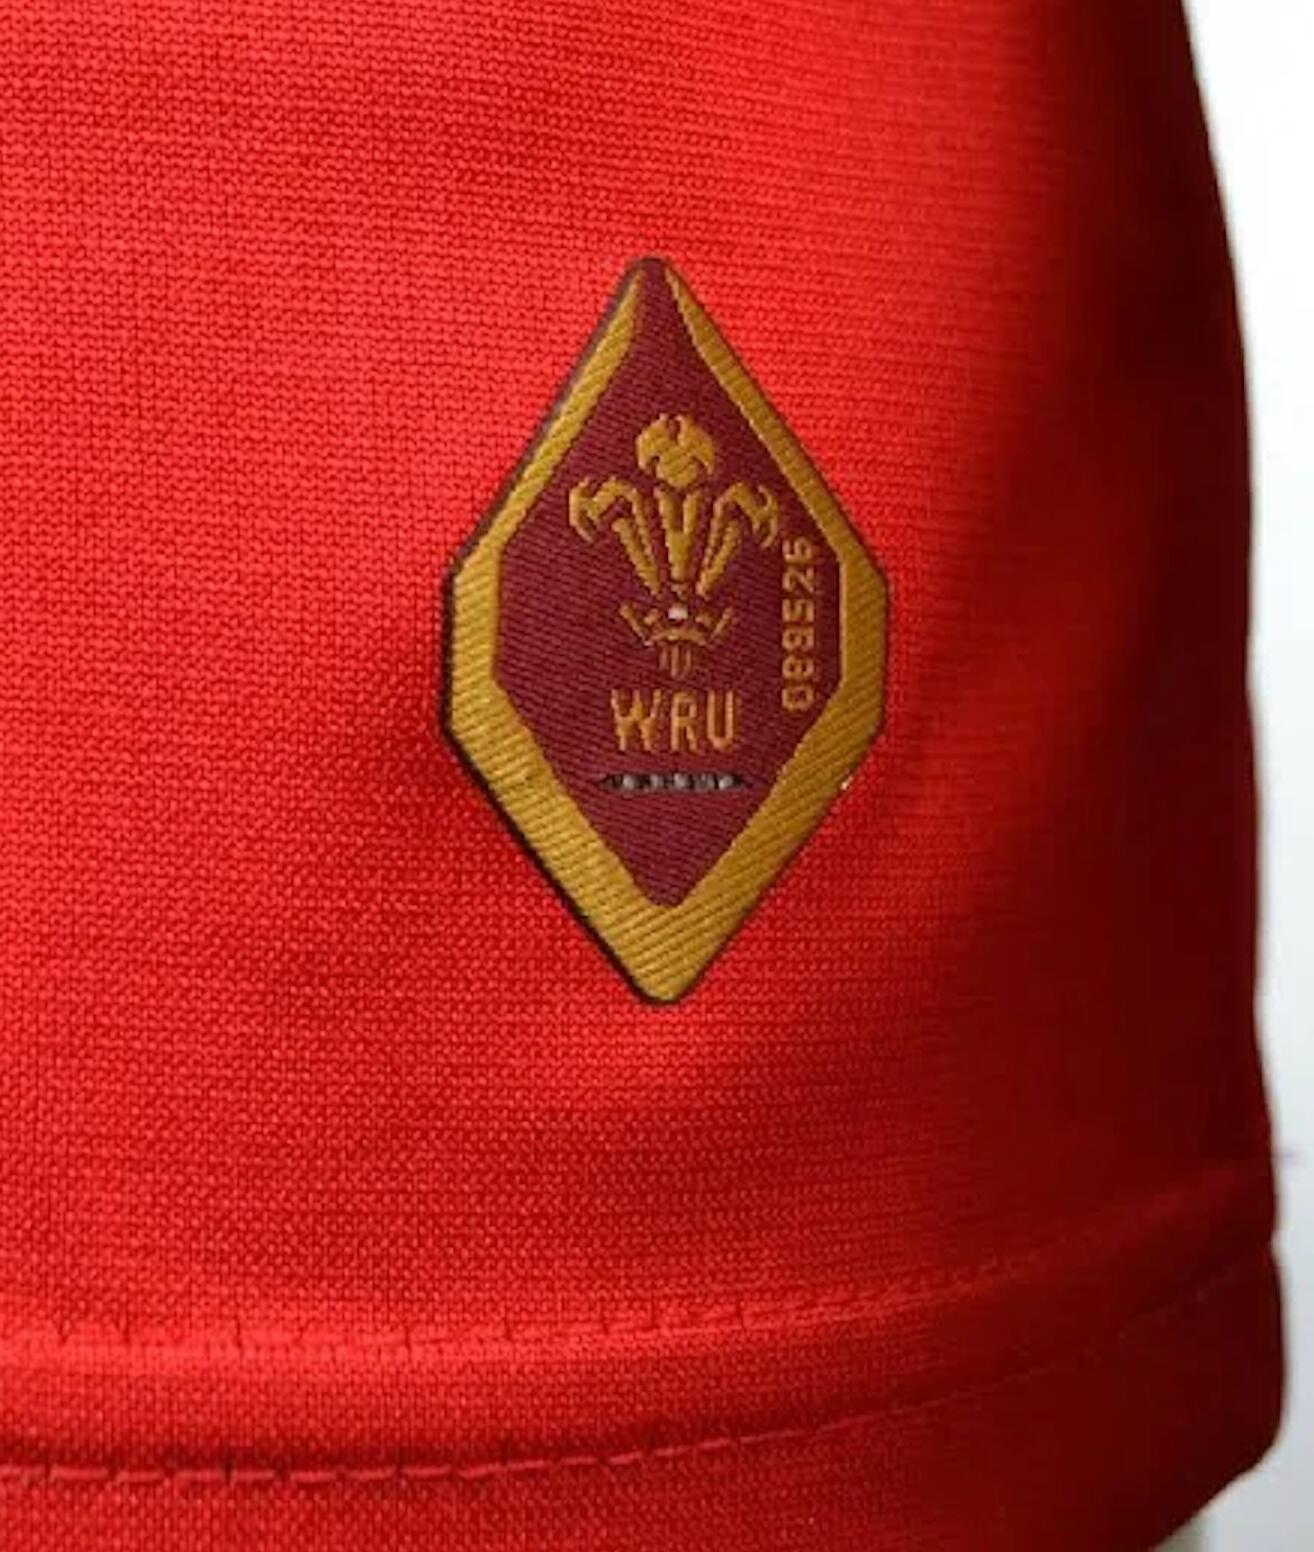 Under Armour Wales WRU Womens Supporters Home Rugby Shirt 15/16 Red 4/5